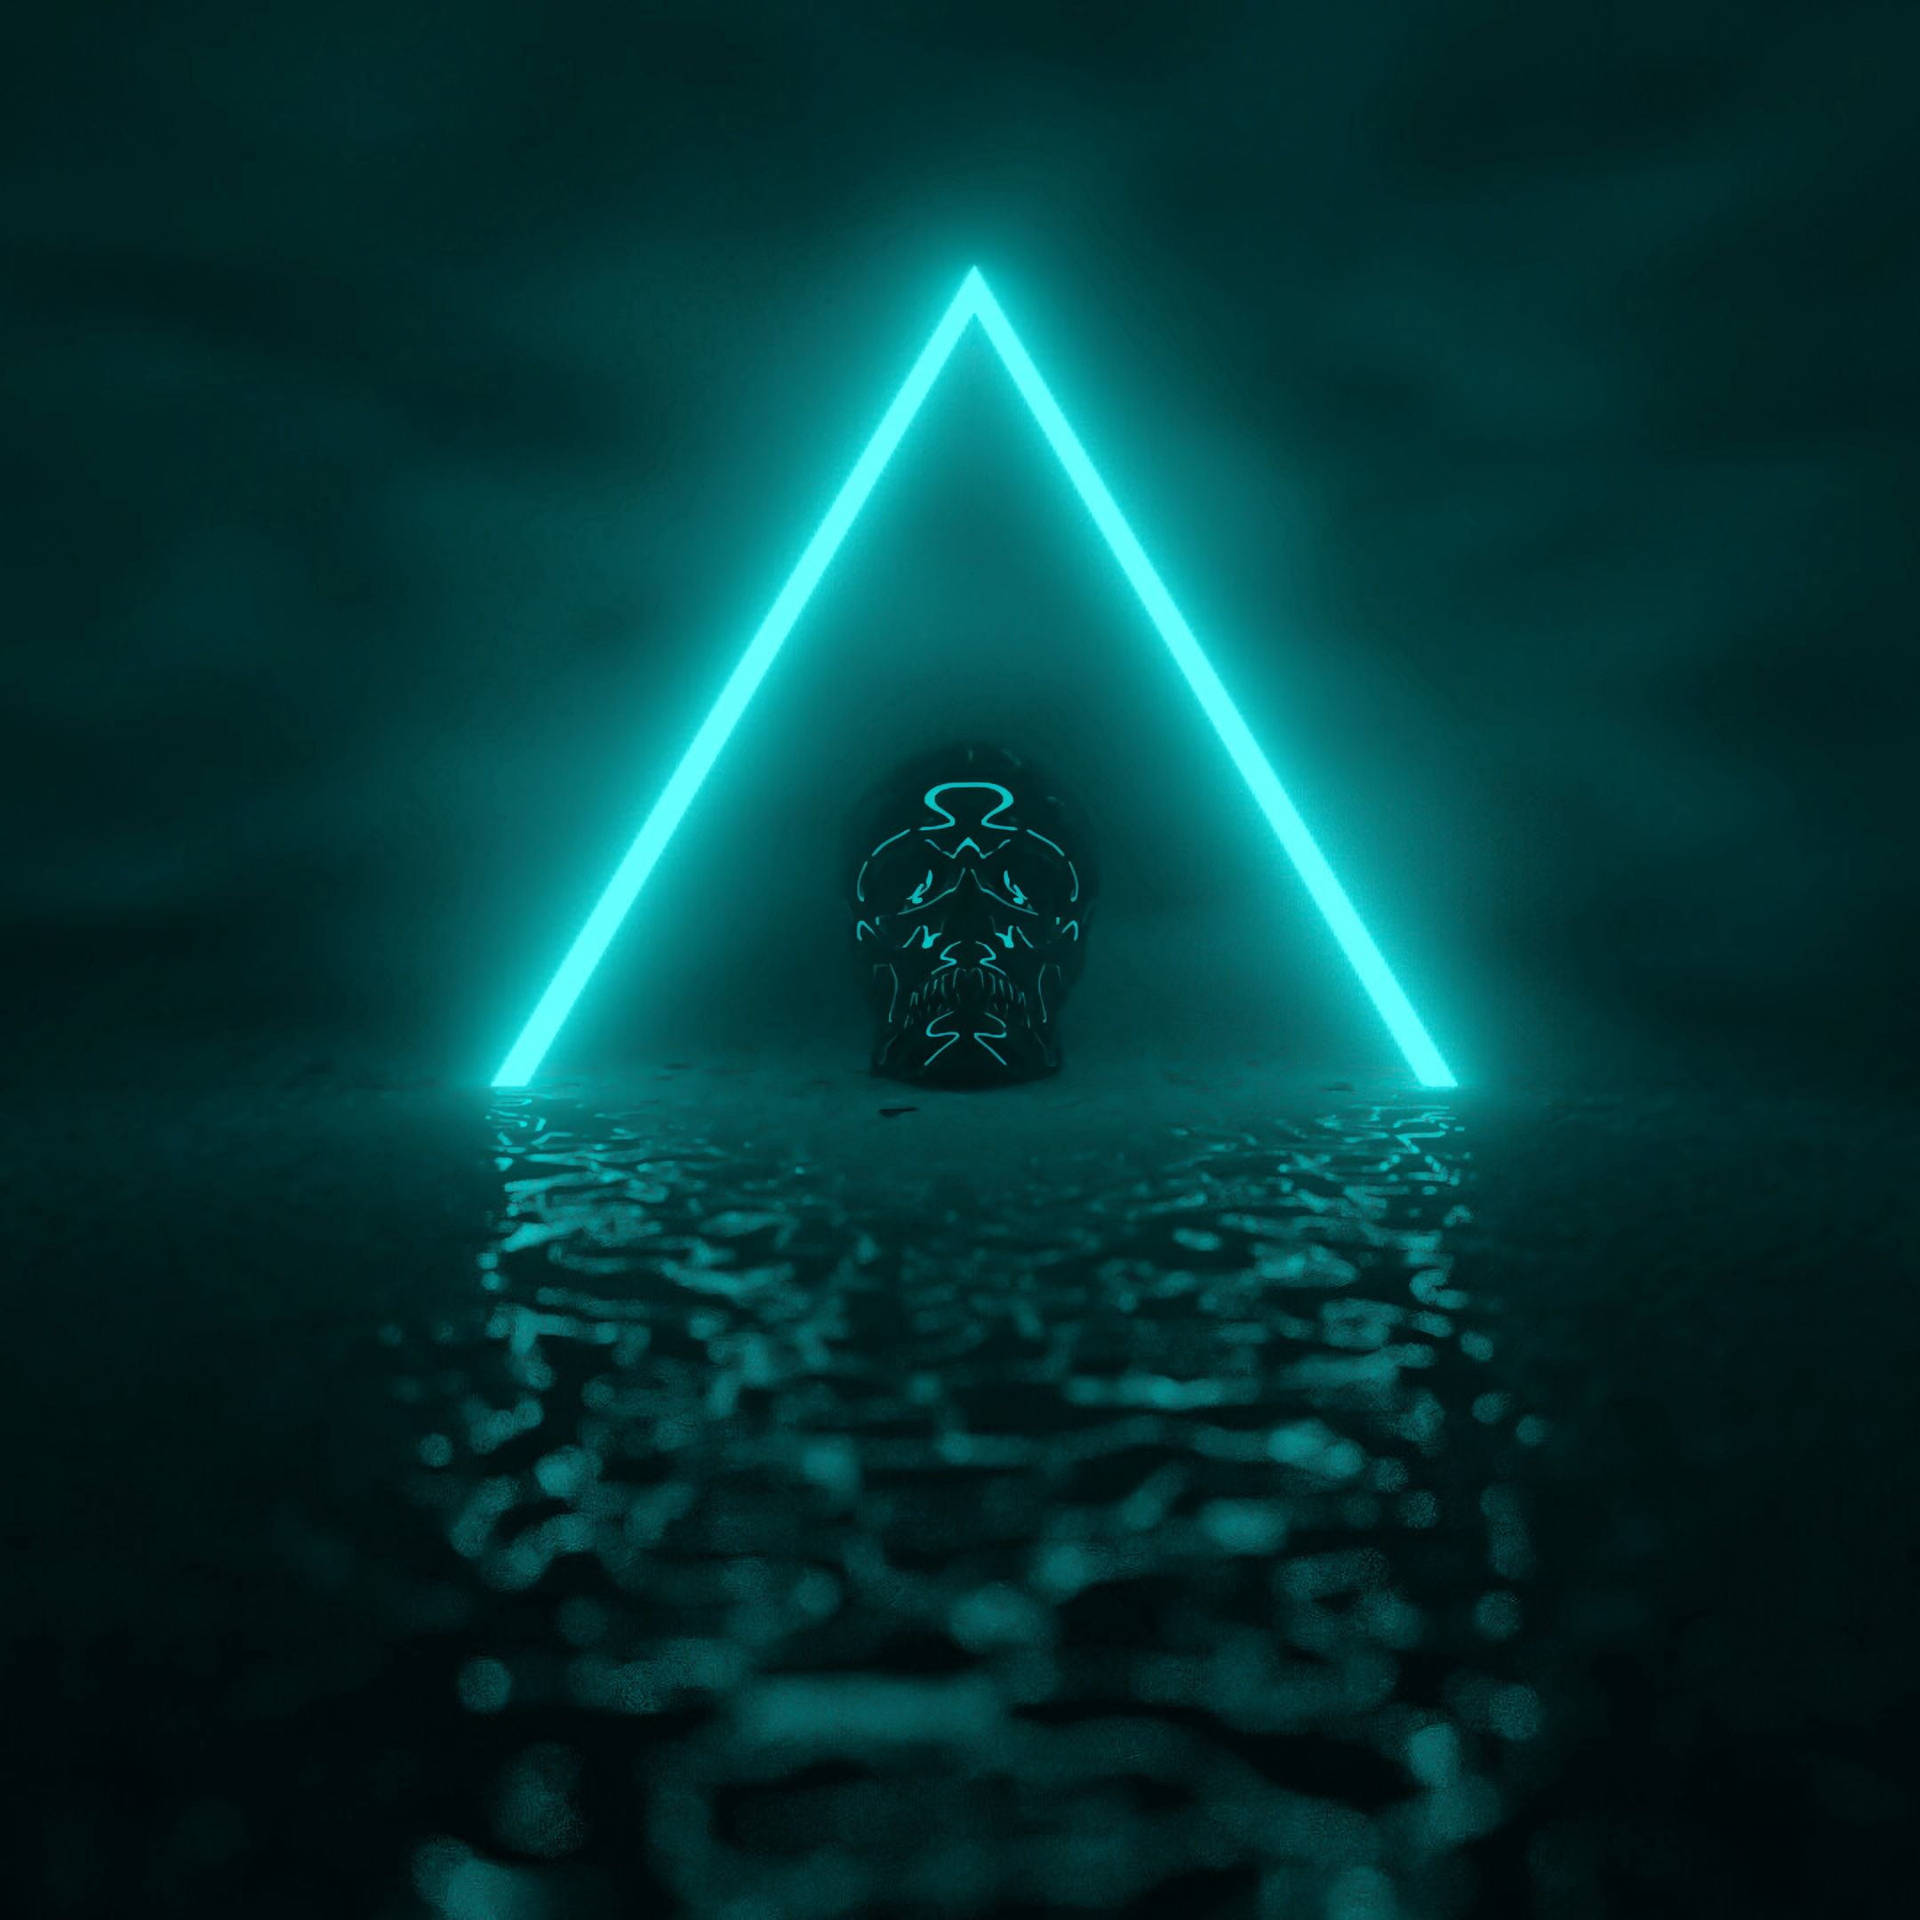 Dark Neon Teal Triangle With Skull Background